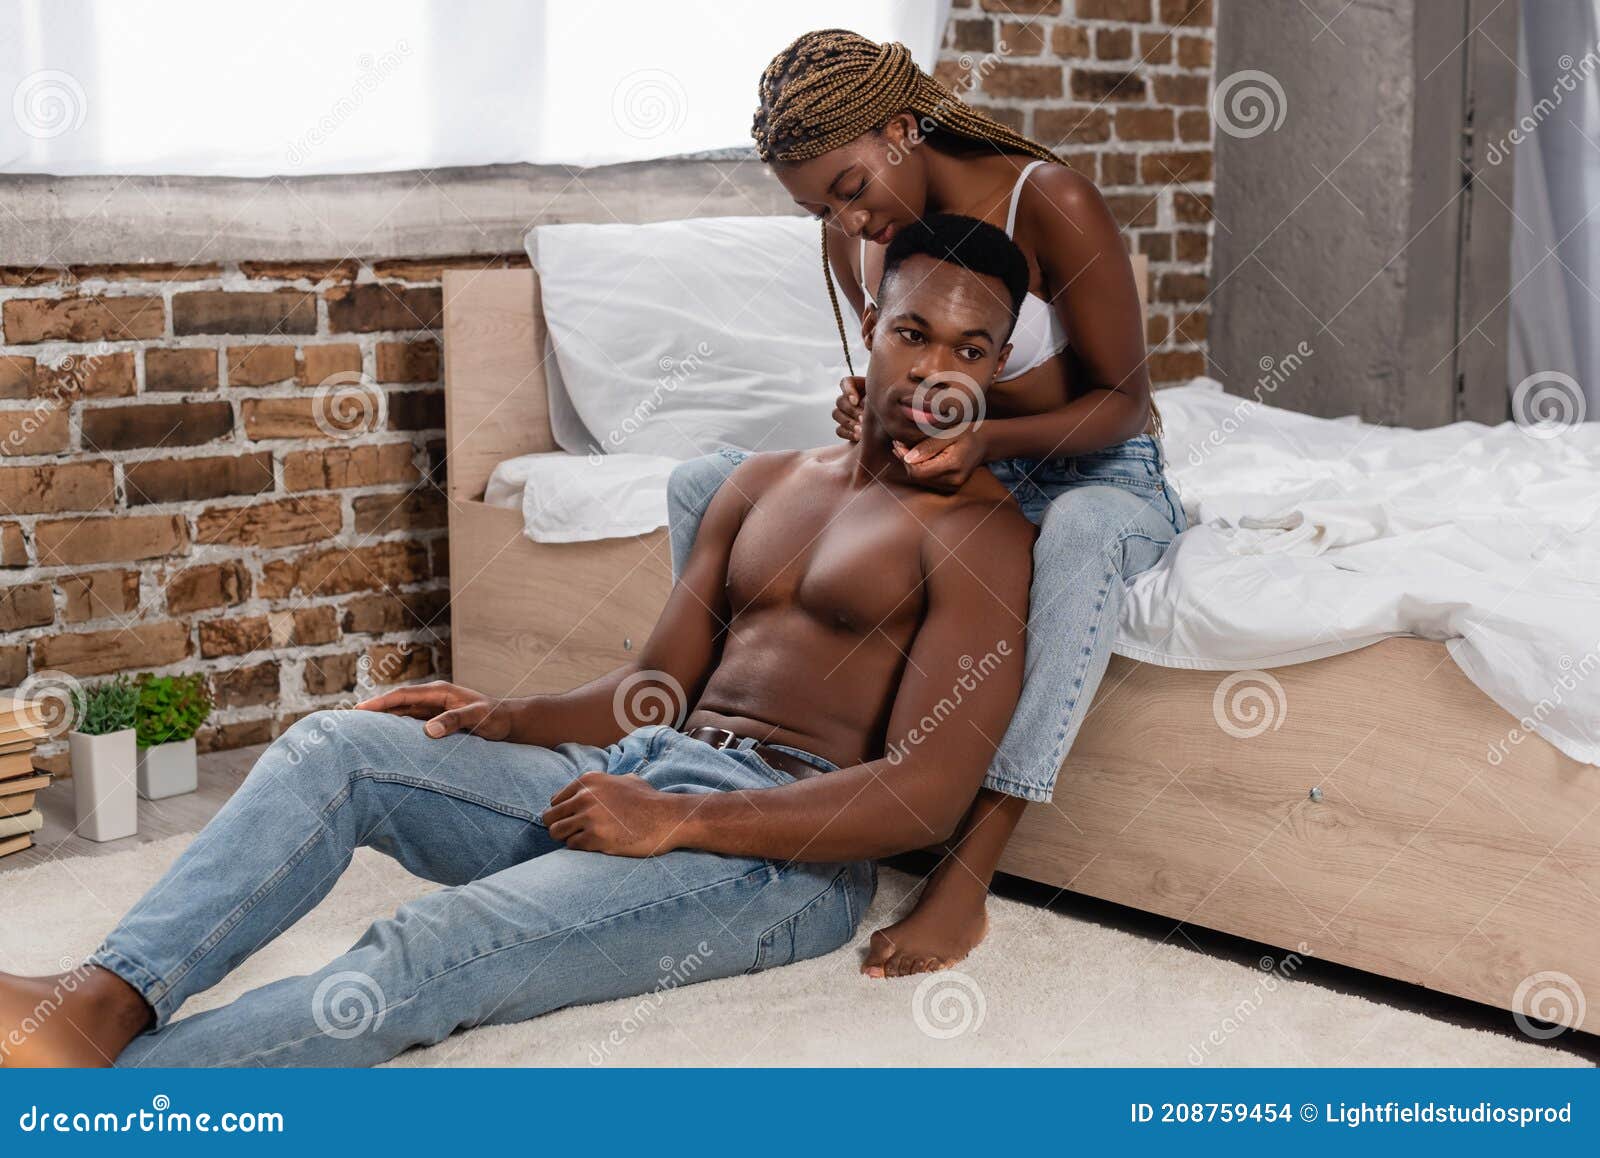 View of Romantic Shirtless African American Stock Photo - Image of